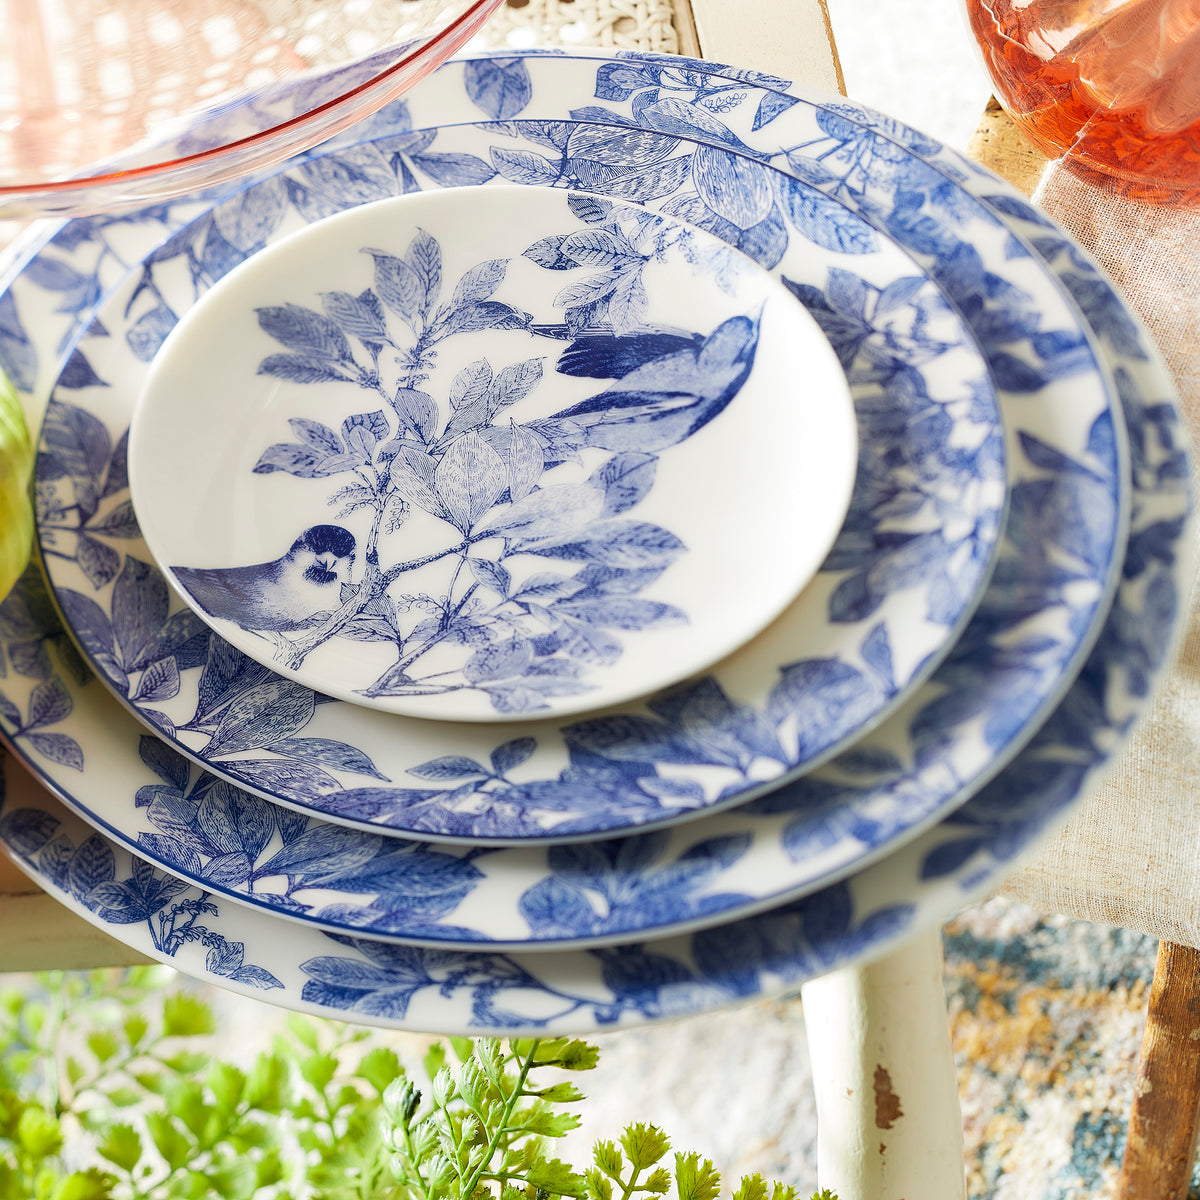 Close-up of a stack of Caskata Artisanal Home Arbor Rimmed Dinner Plates with blue floral and bird patterns, arranged on a table with a light-colored linen cloth underneath. A green plant is partially visible in the foreground, highlighting the heirloom-quality dinnerware&#39;s delicate botanical details.